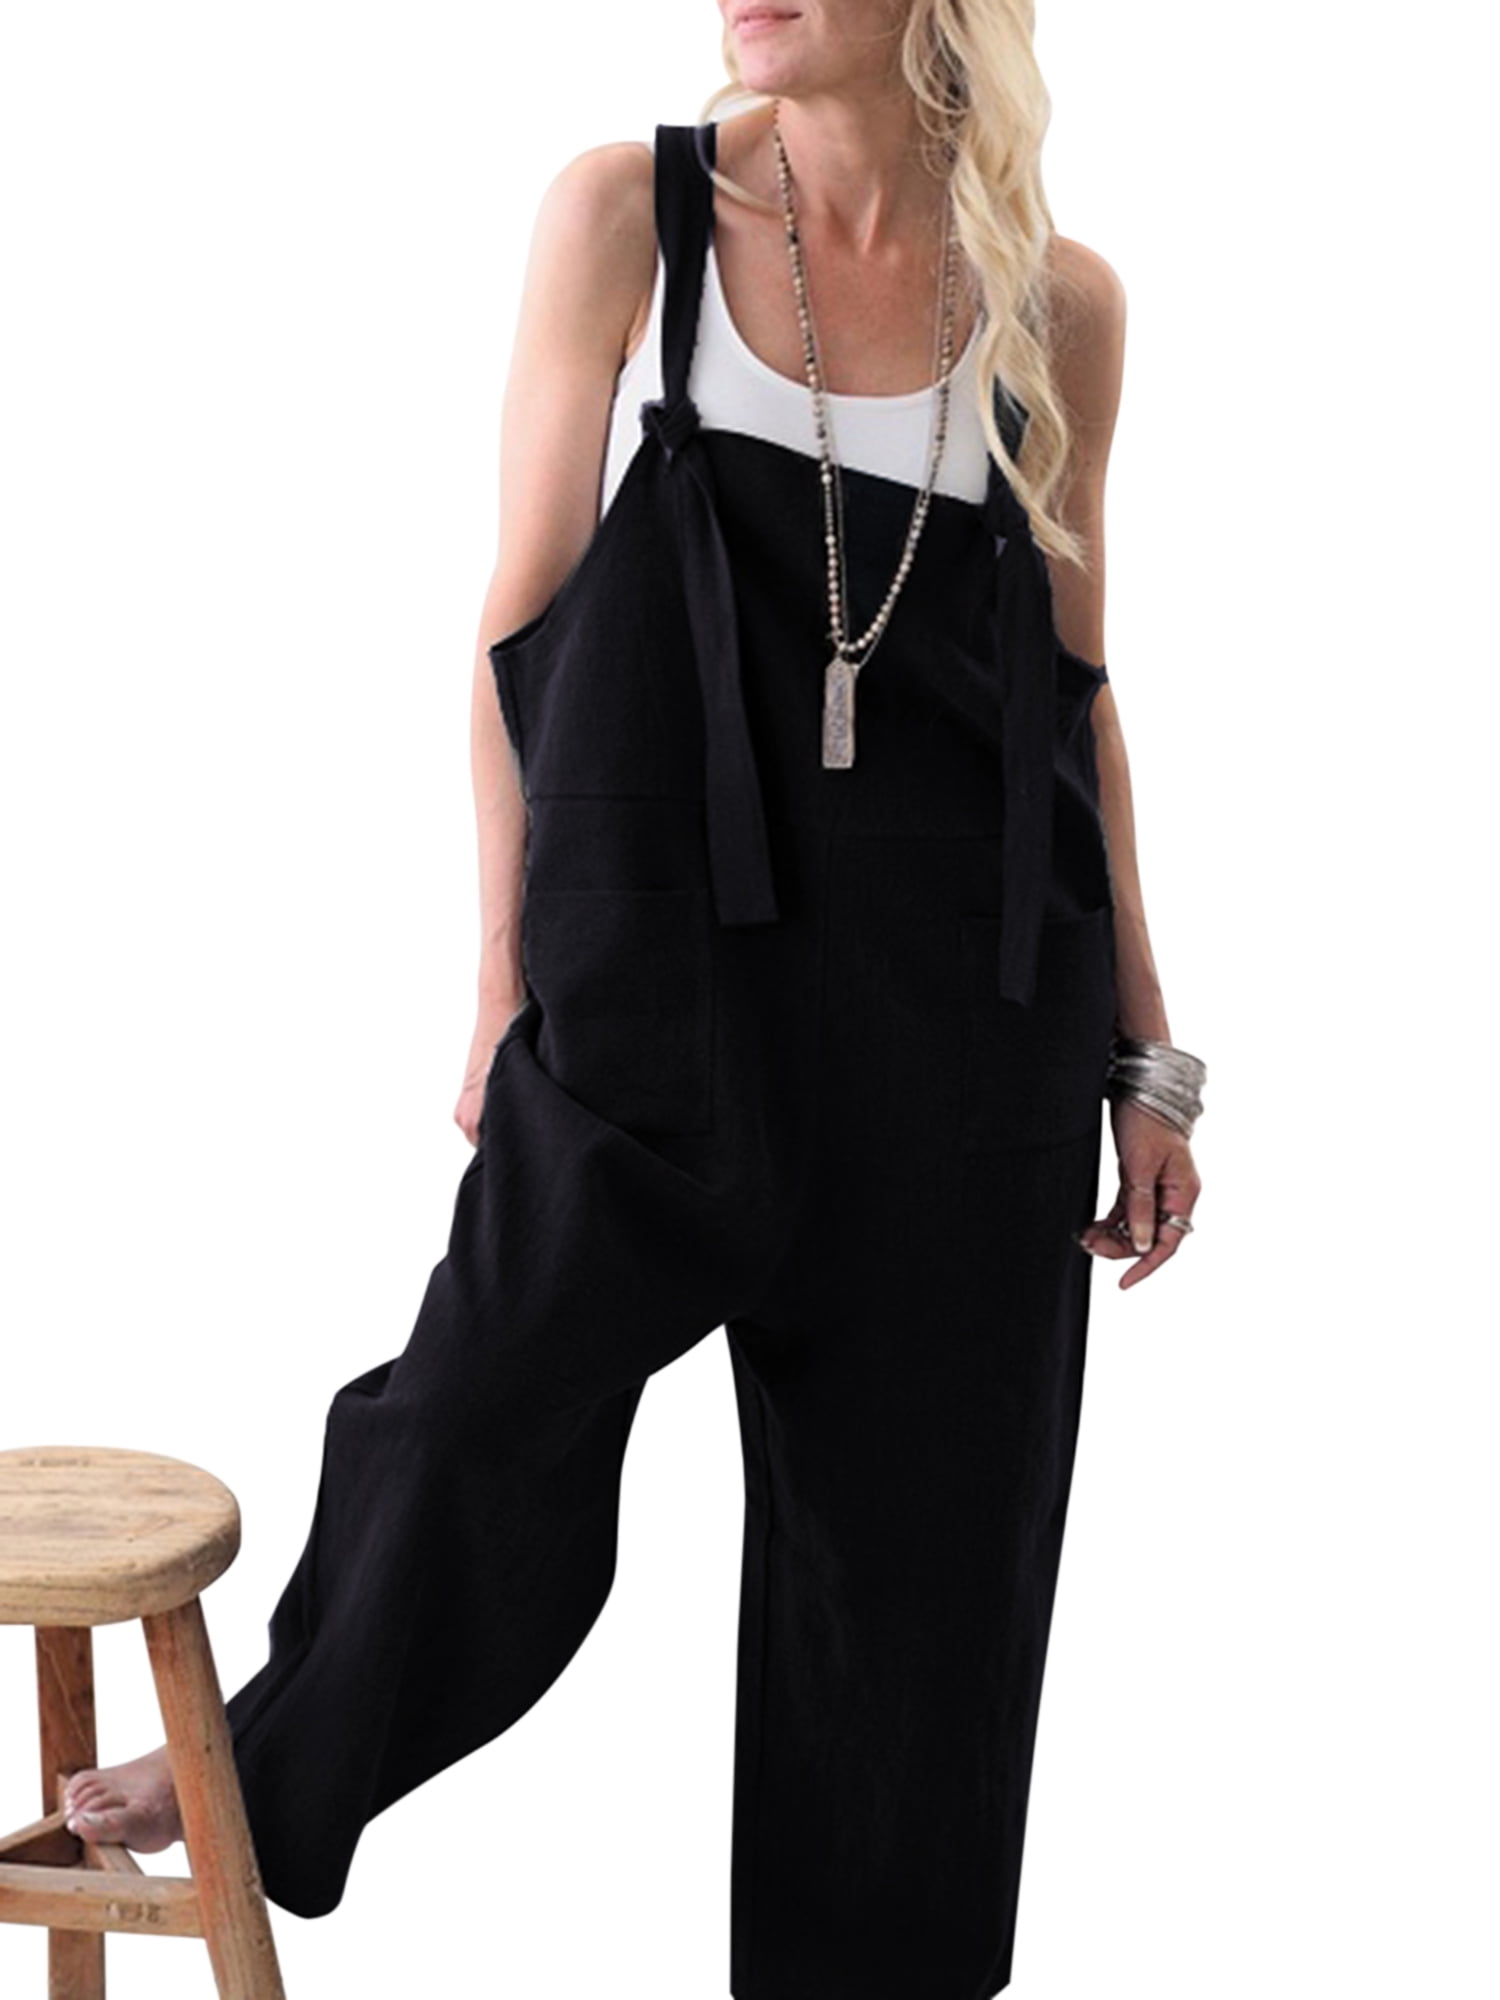 loose dungarees jumpsuit